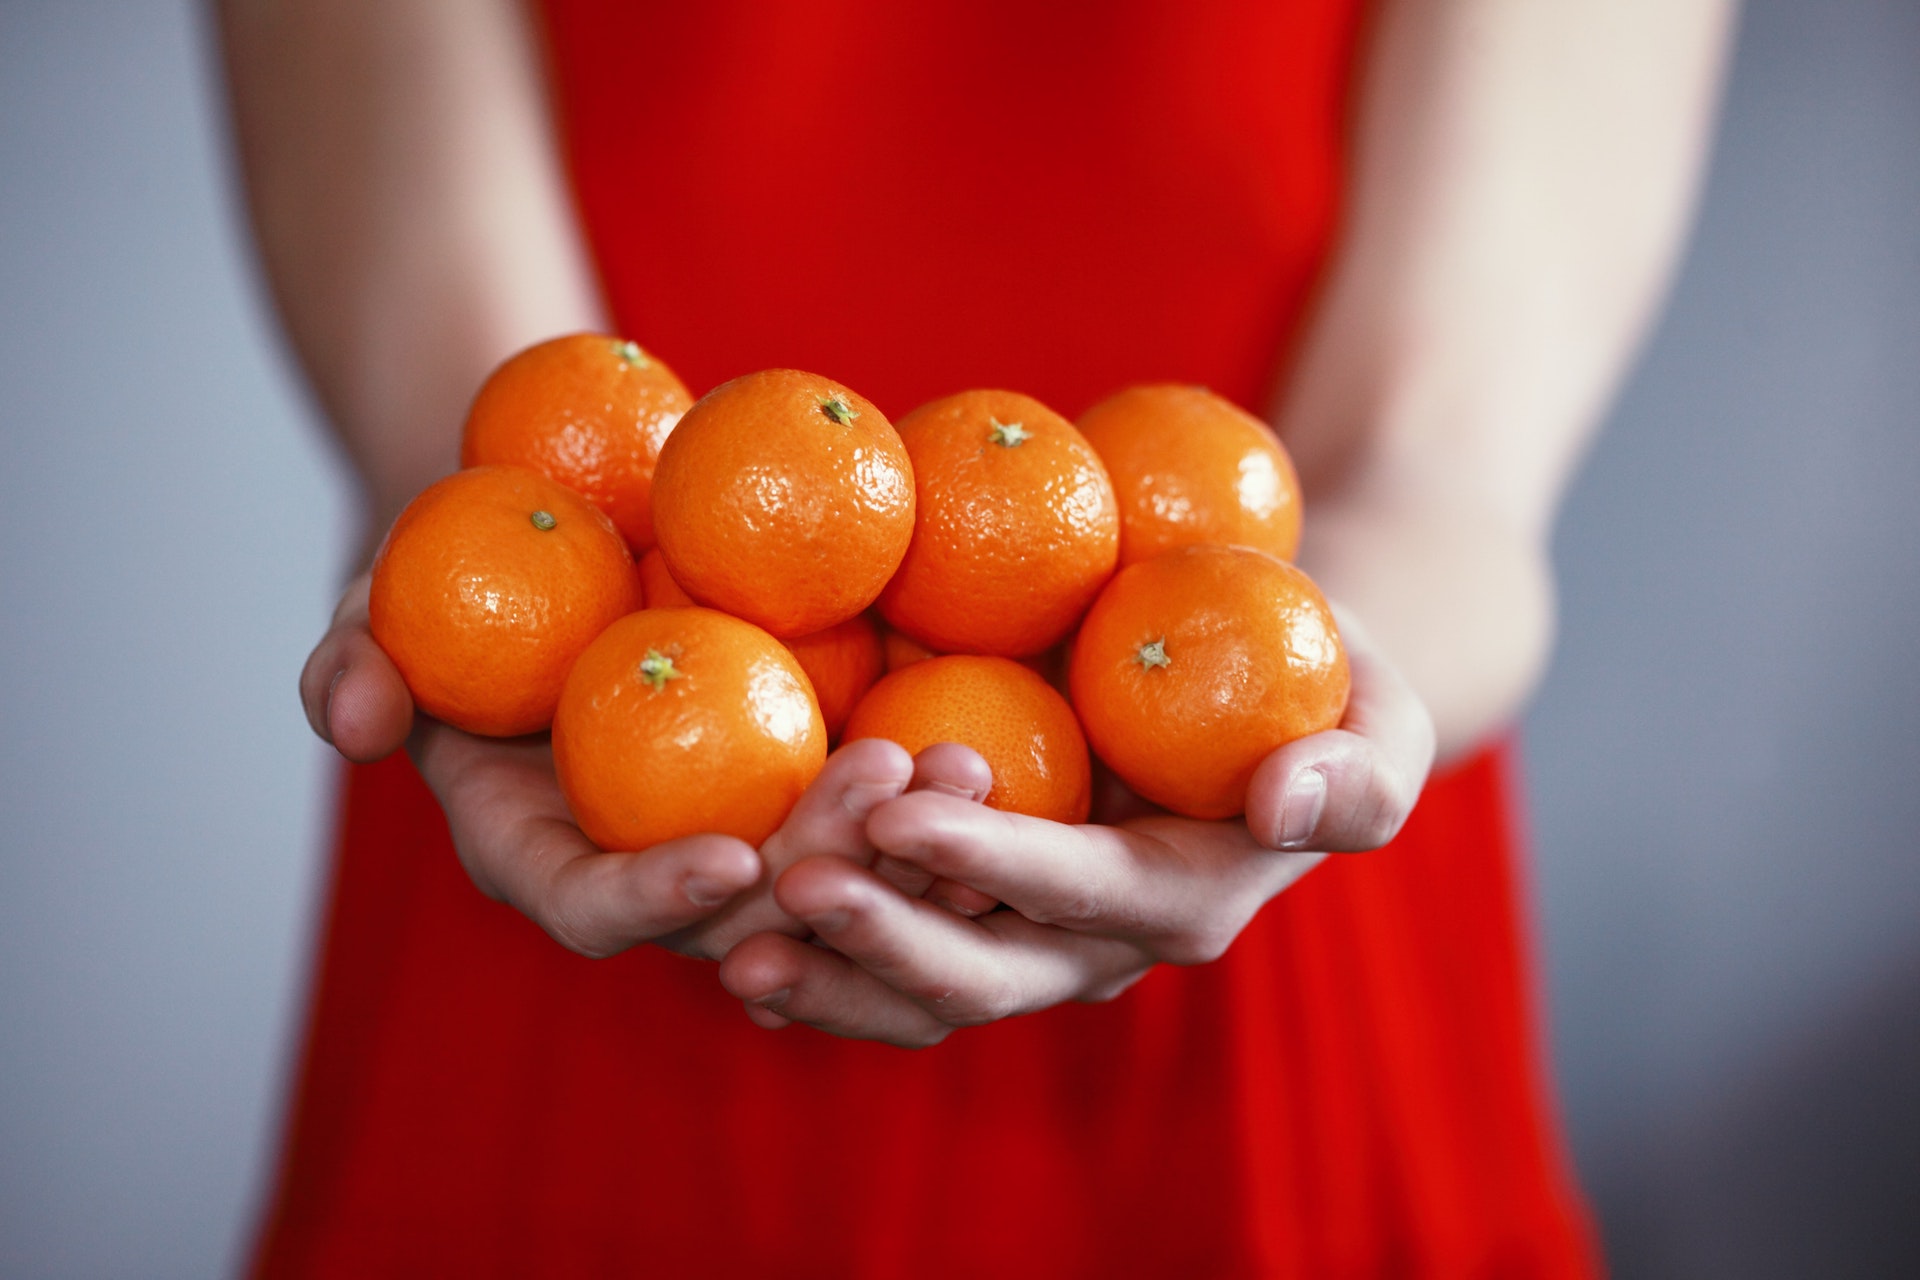 a person in a red dress holding many mandarins